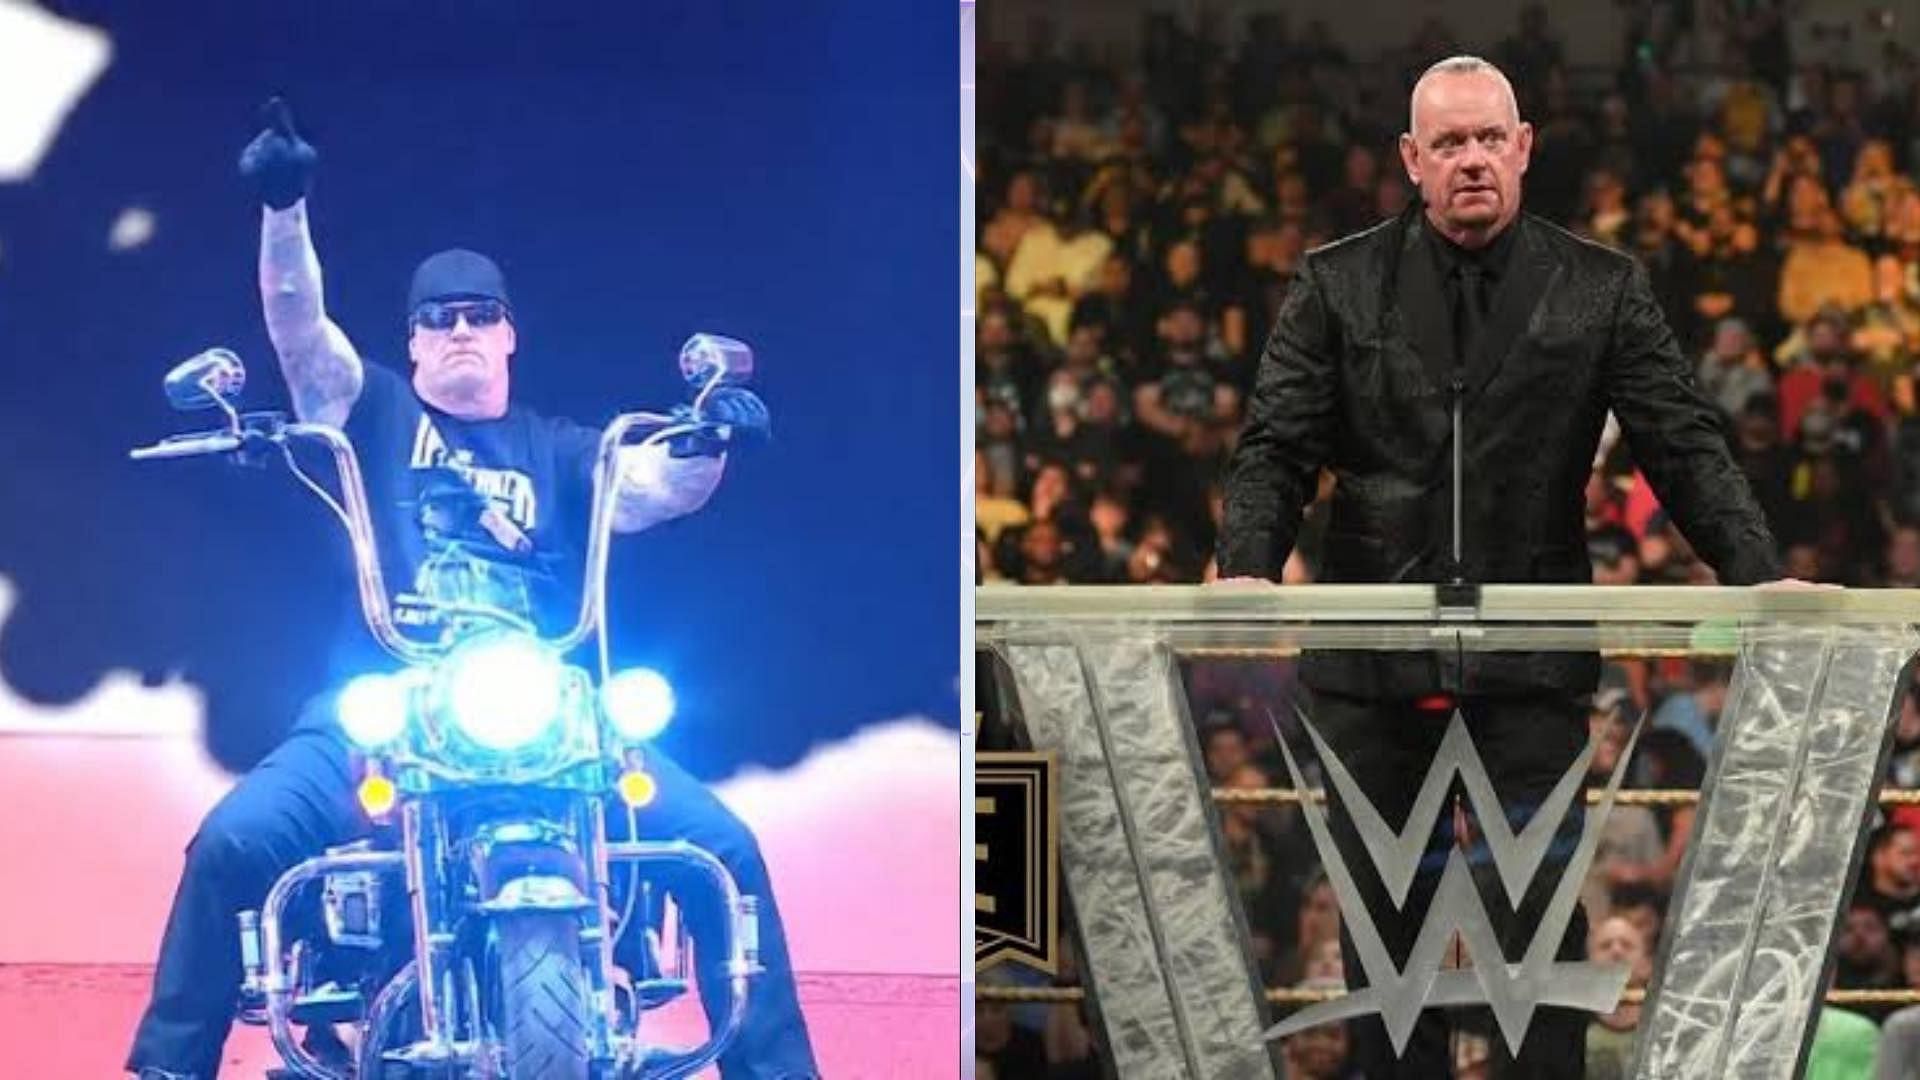 Some fans hope to see The Undertaker return to WWE for one more match